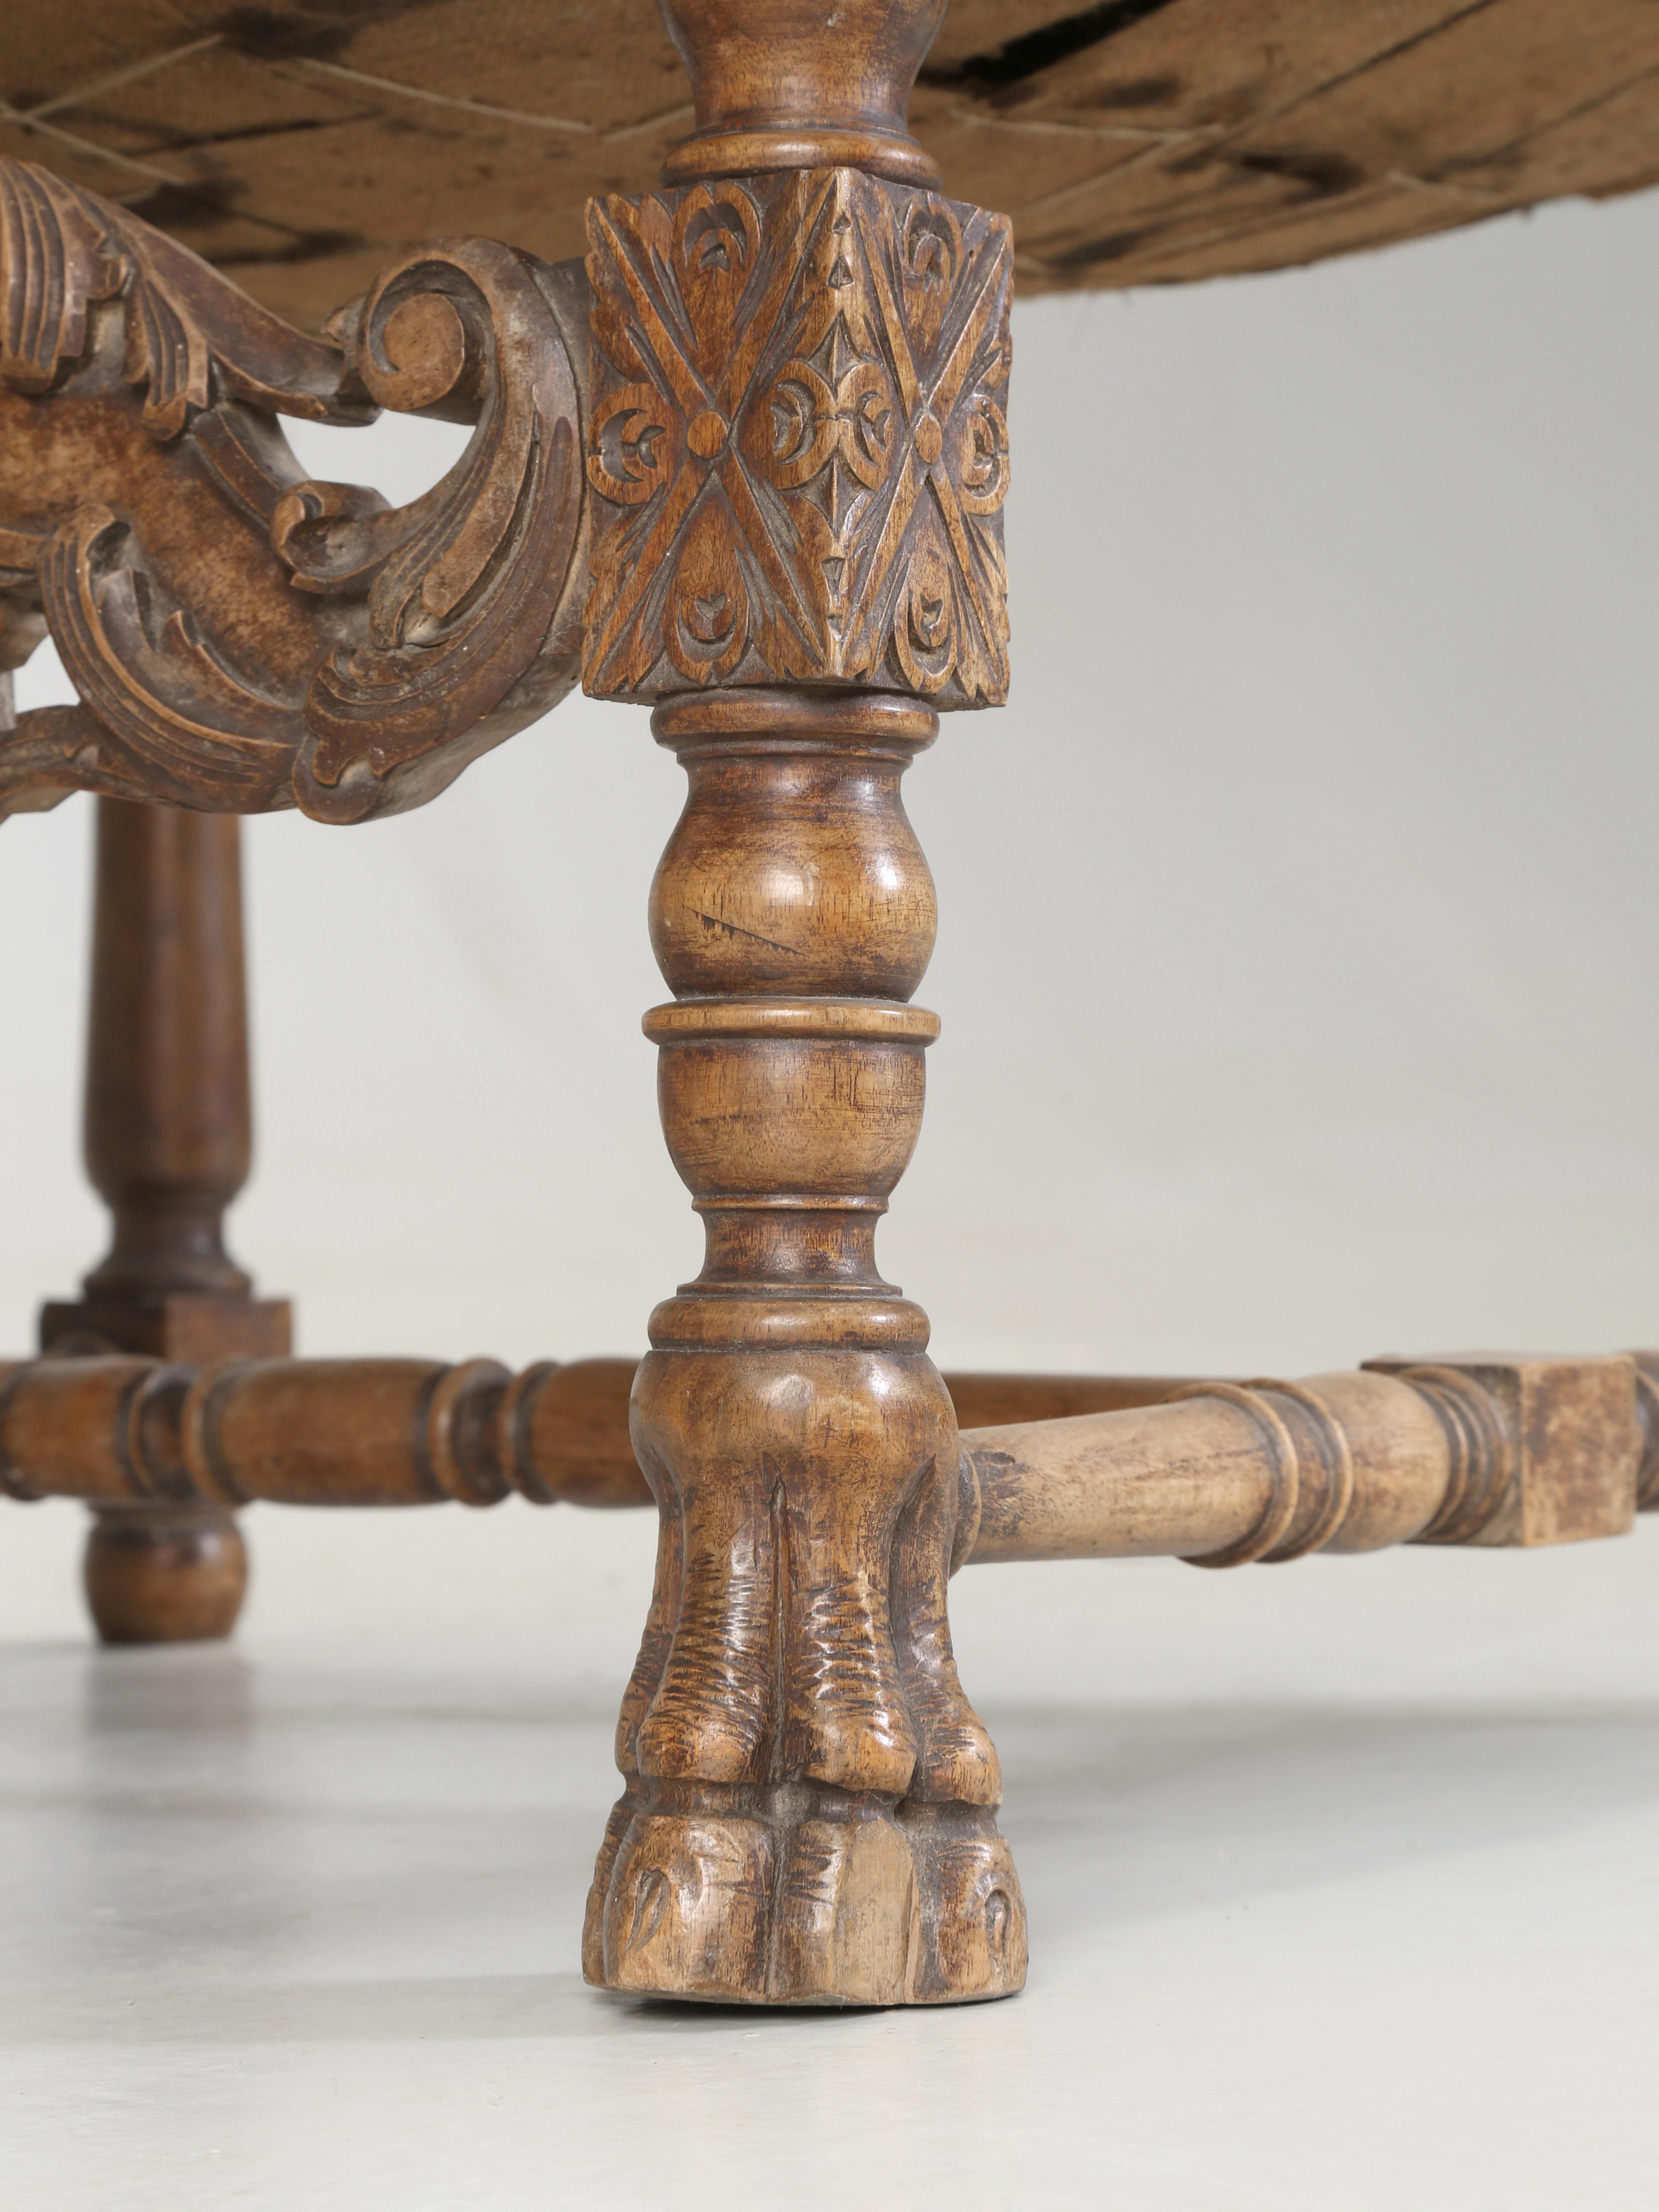 Antique Pair of Italian Armchairs Hand Carved Walnut Require Restoration, C1880s For Sale 9